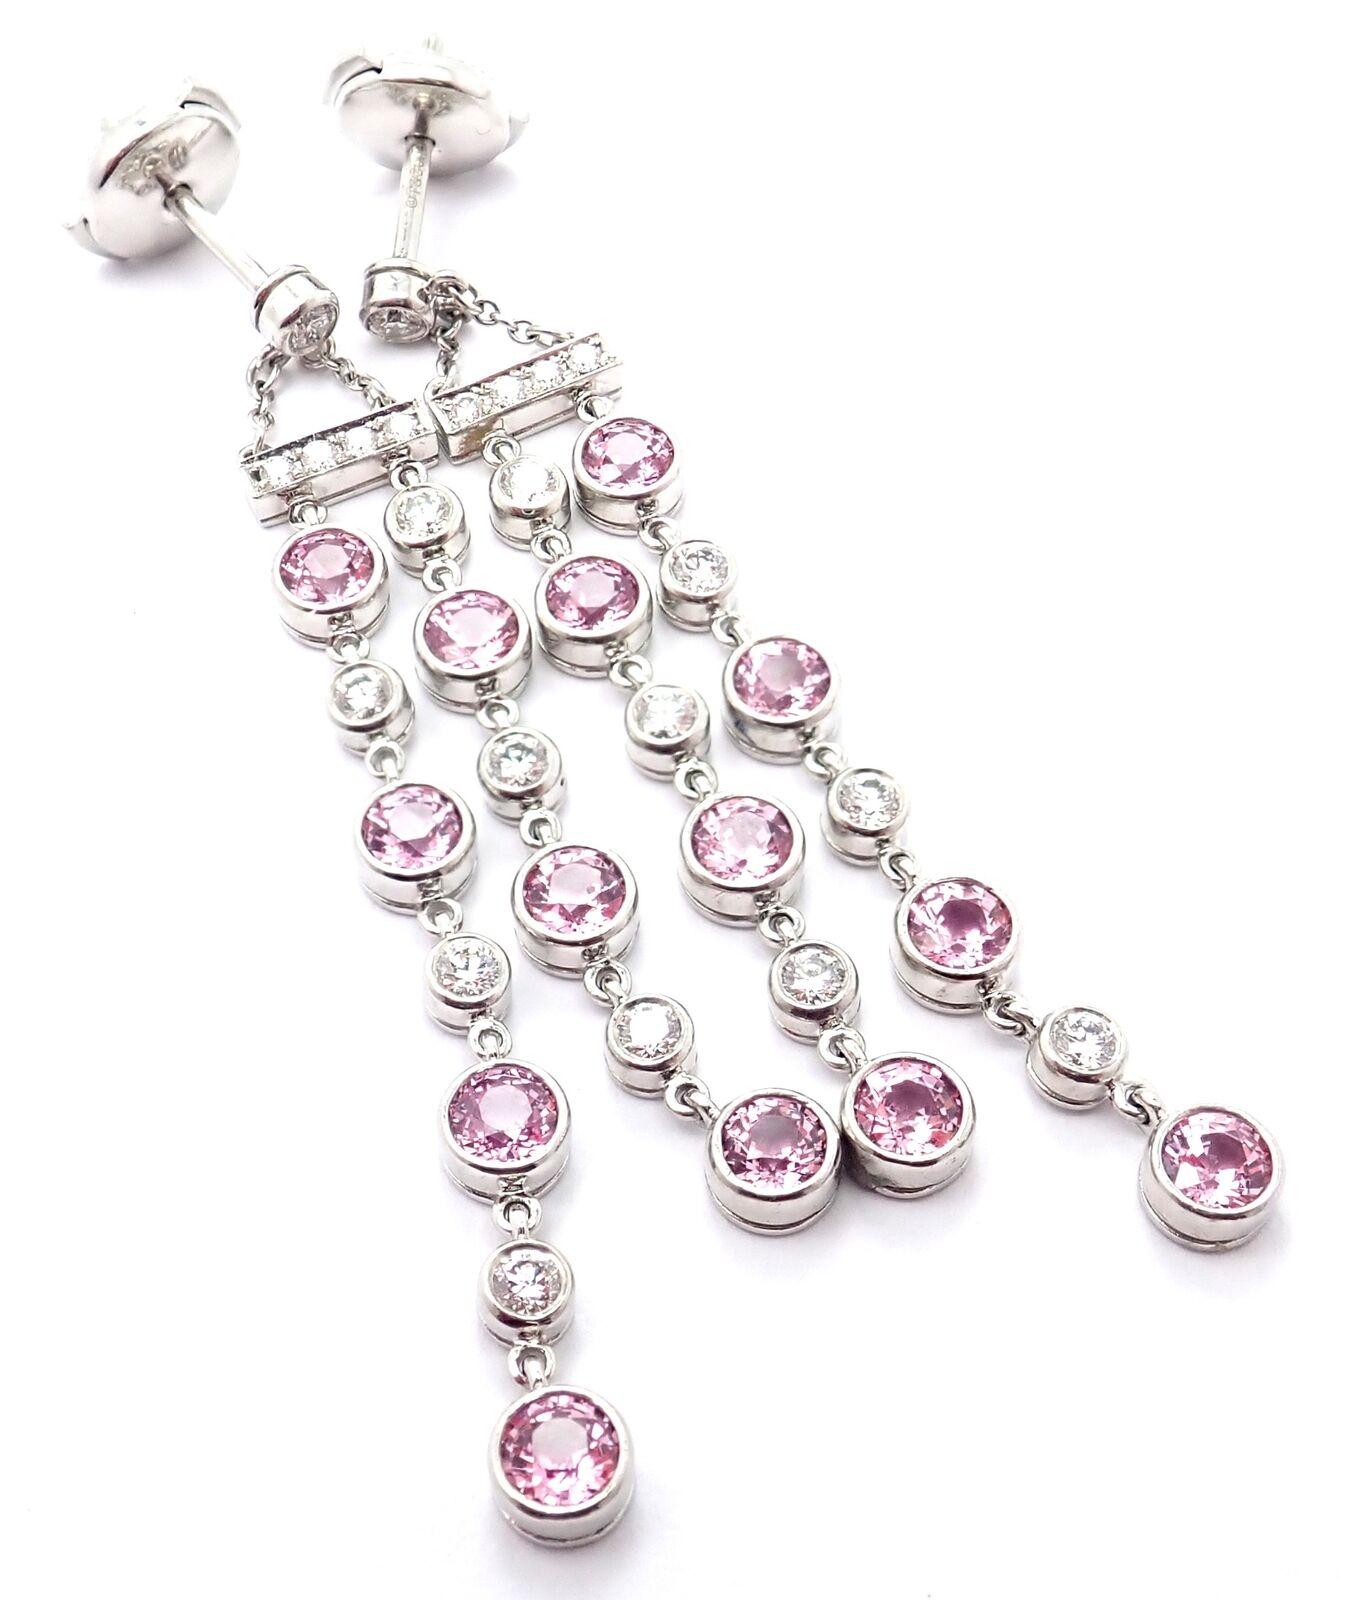 Platinum Jazz Diamond Pink Sapphire Drop Dangle Earrings by Tiffany & Co. 
With 12 round brilliant cut diamonds VS1 clarity, G color total weight approximately .80ct
14 round pink sapphire stones.
These earrings are for pierced ears.
Details: